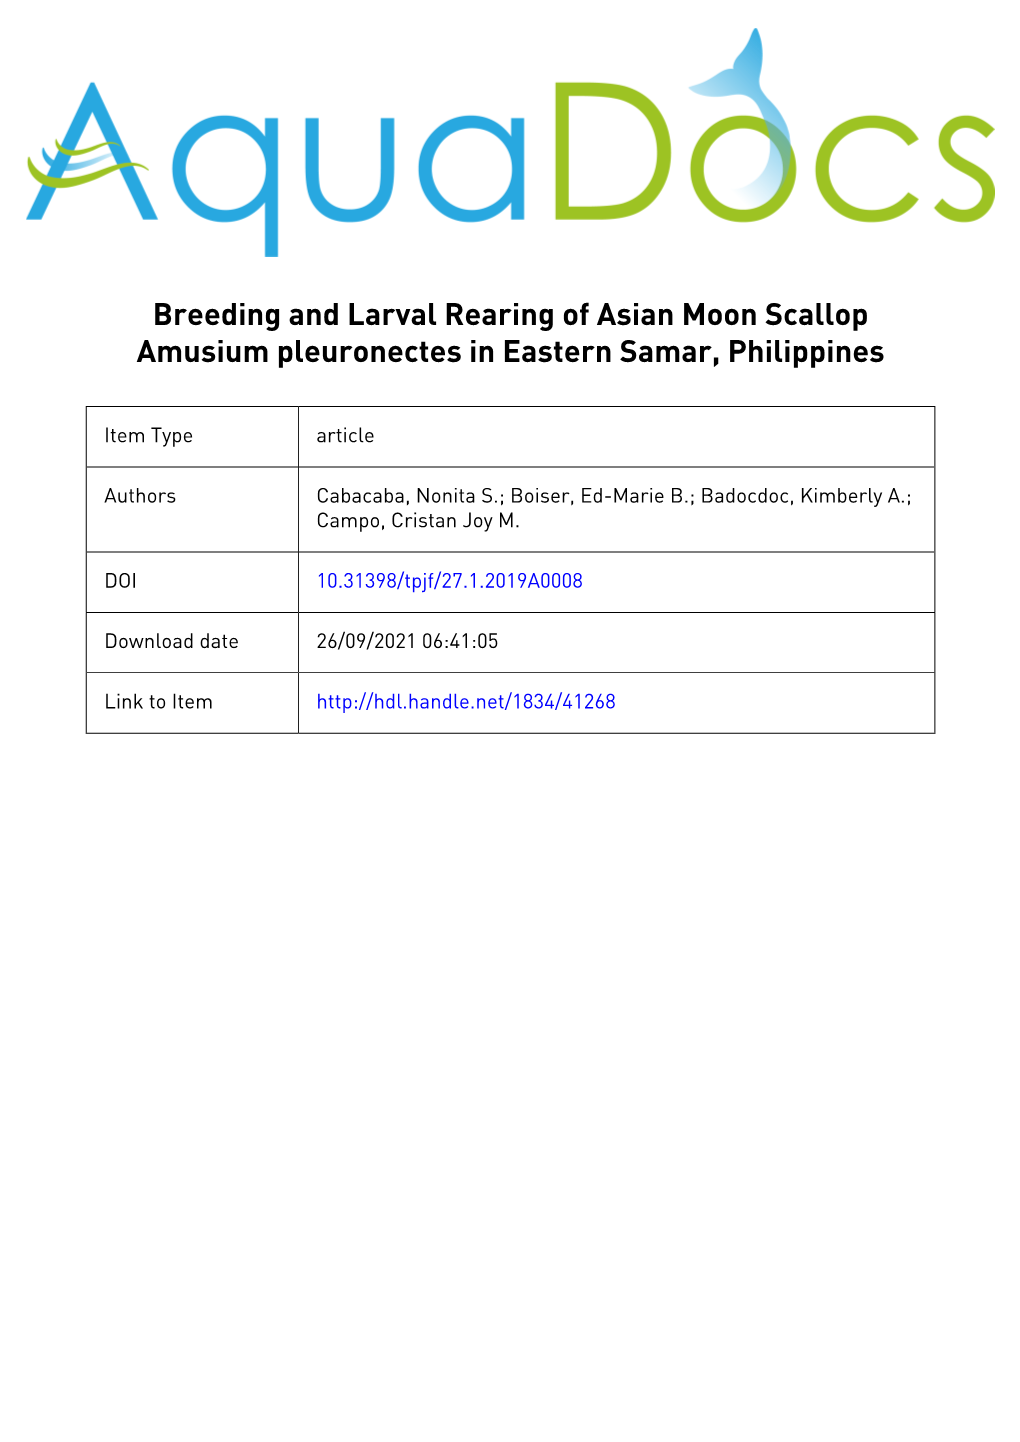 Breeding and Larval Rearing of Asian Moon Scallop Amusium Pleuronectes in Eastern Samar, Philippines